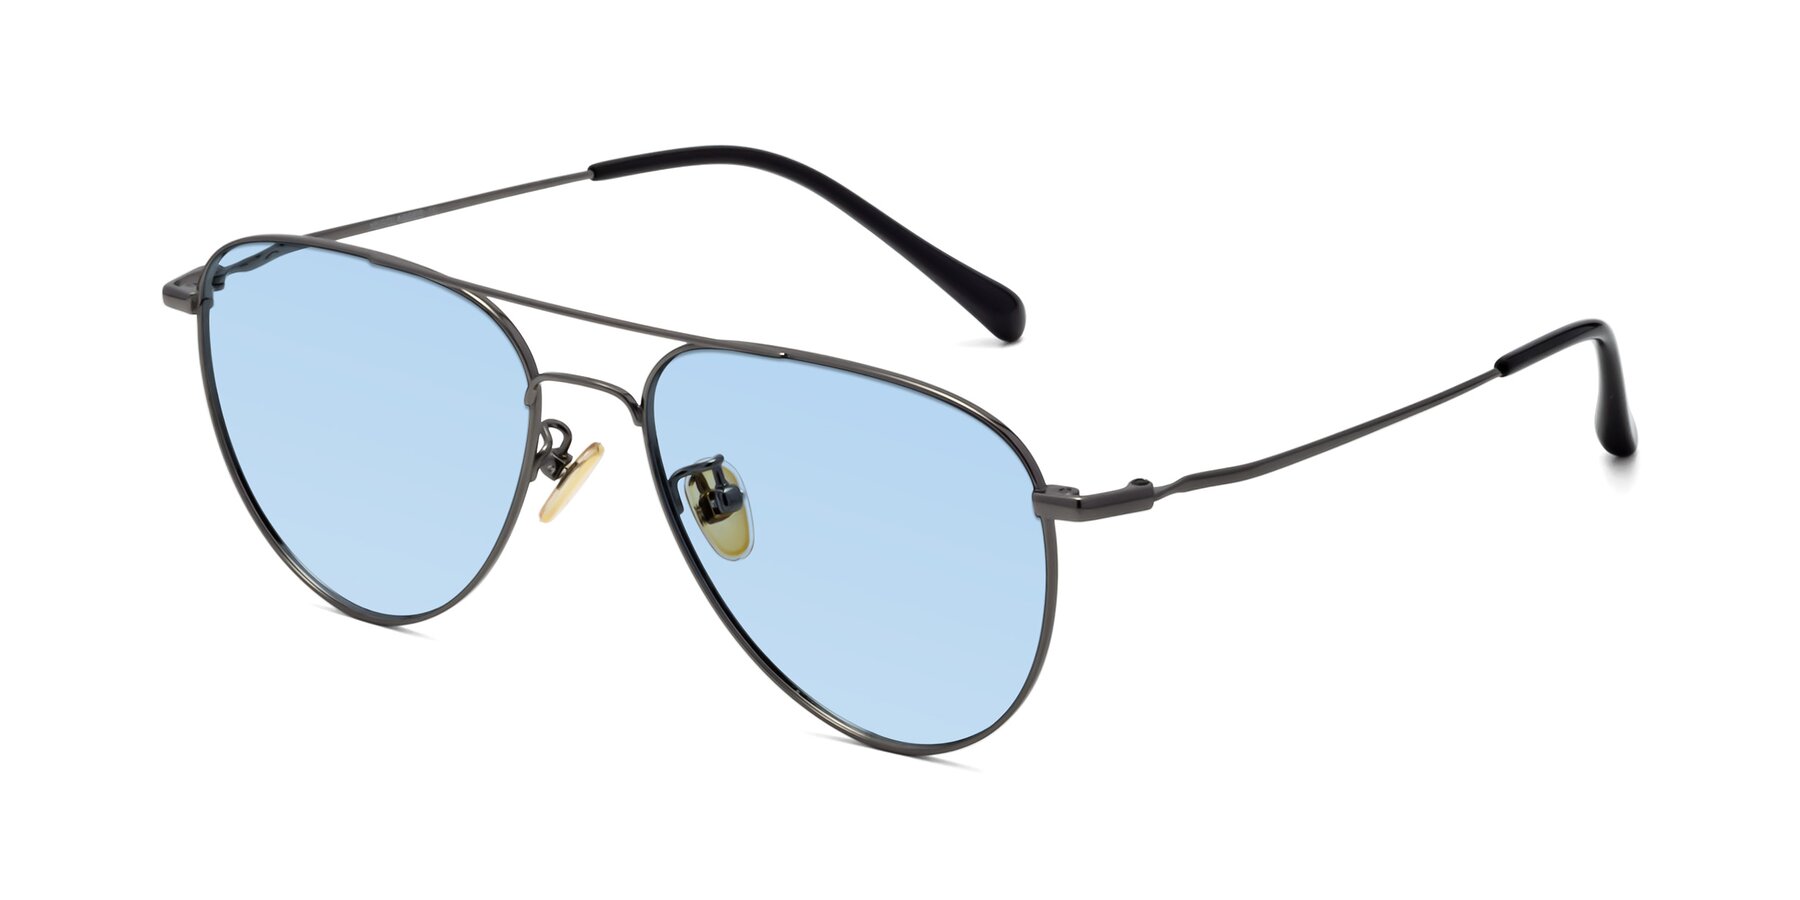 Angle of Hindley in Gunmetal with Light Blue Tinted Lenses